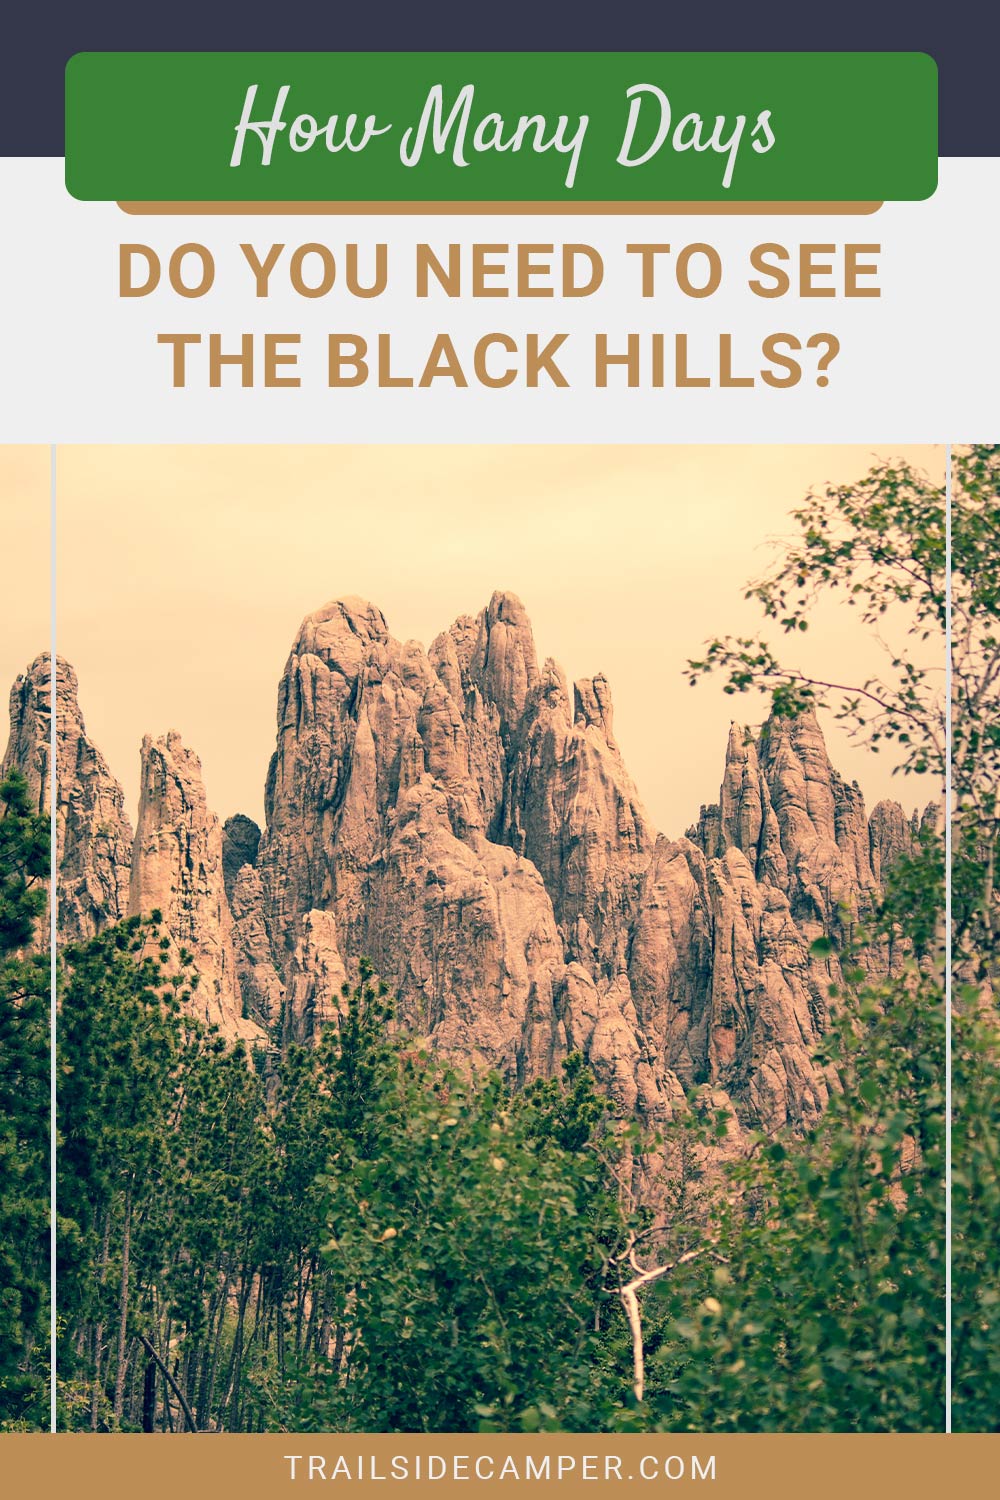 How Many Days Do You Need to See the Black Hills?